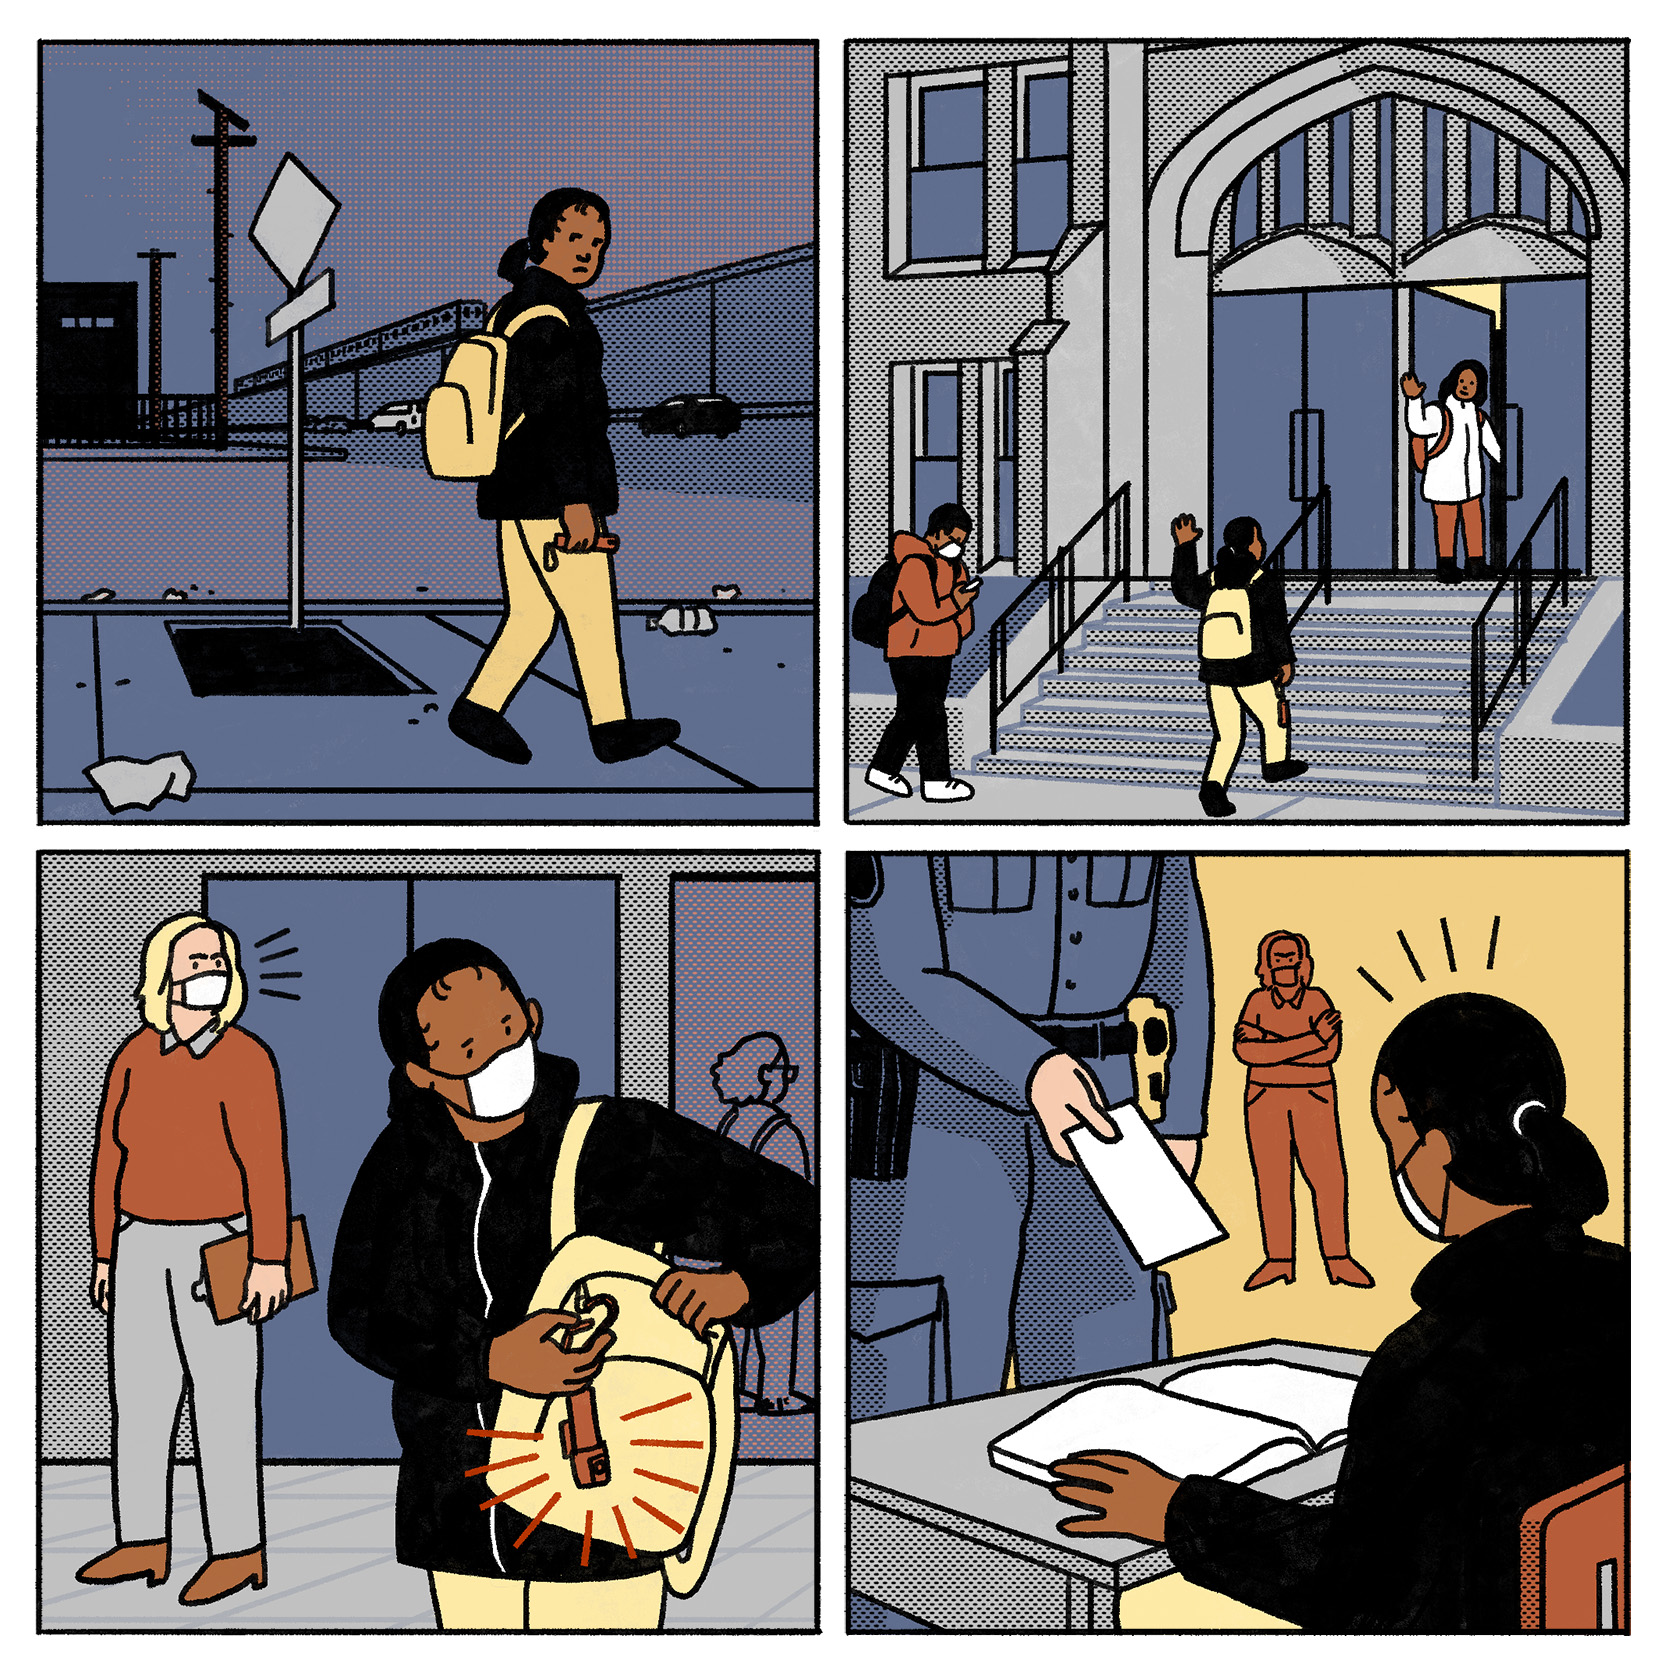 A four-panel cartoon showing a girl entering a school with a vape pen who is then issued a ticket by a police officer